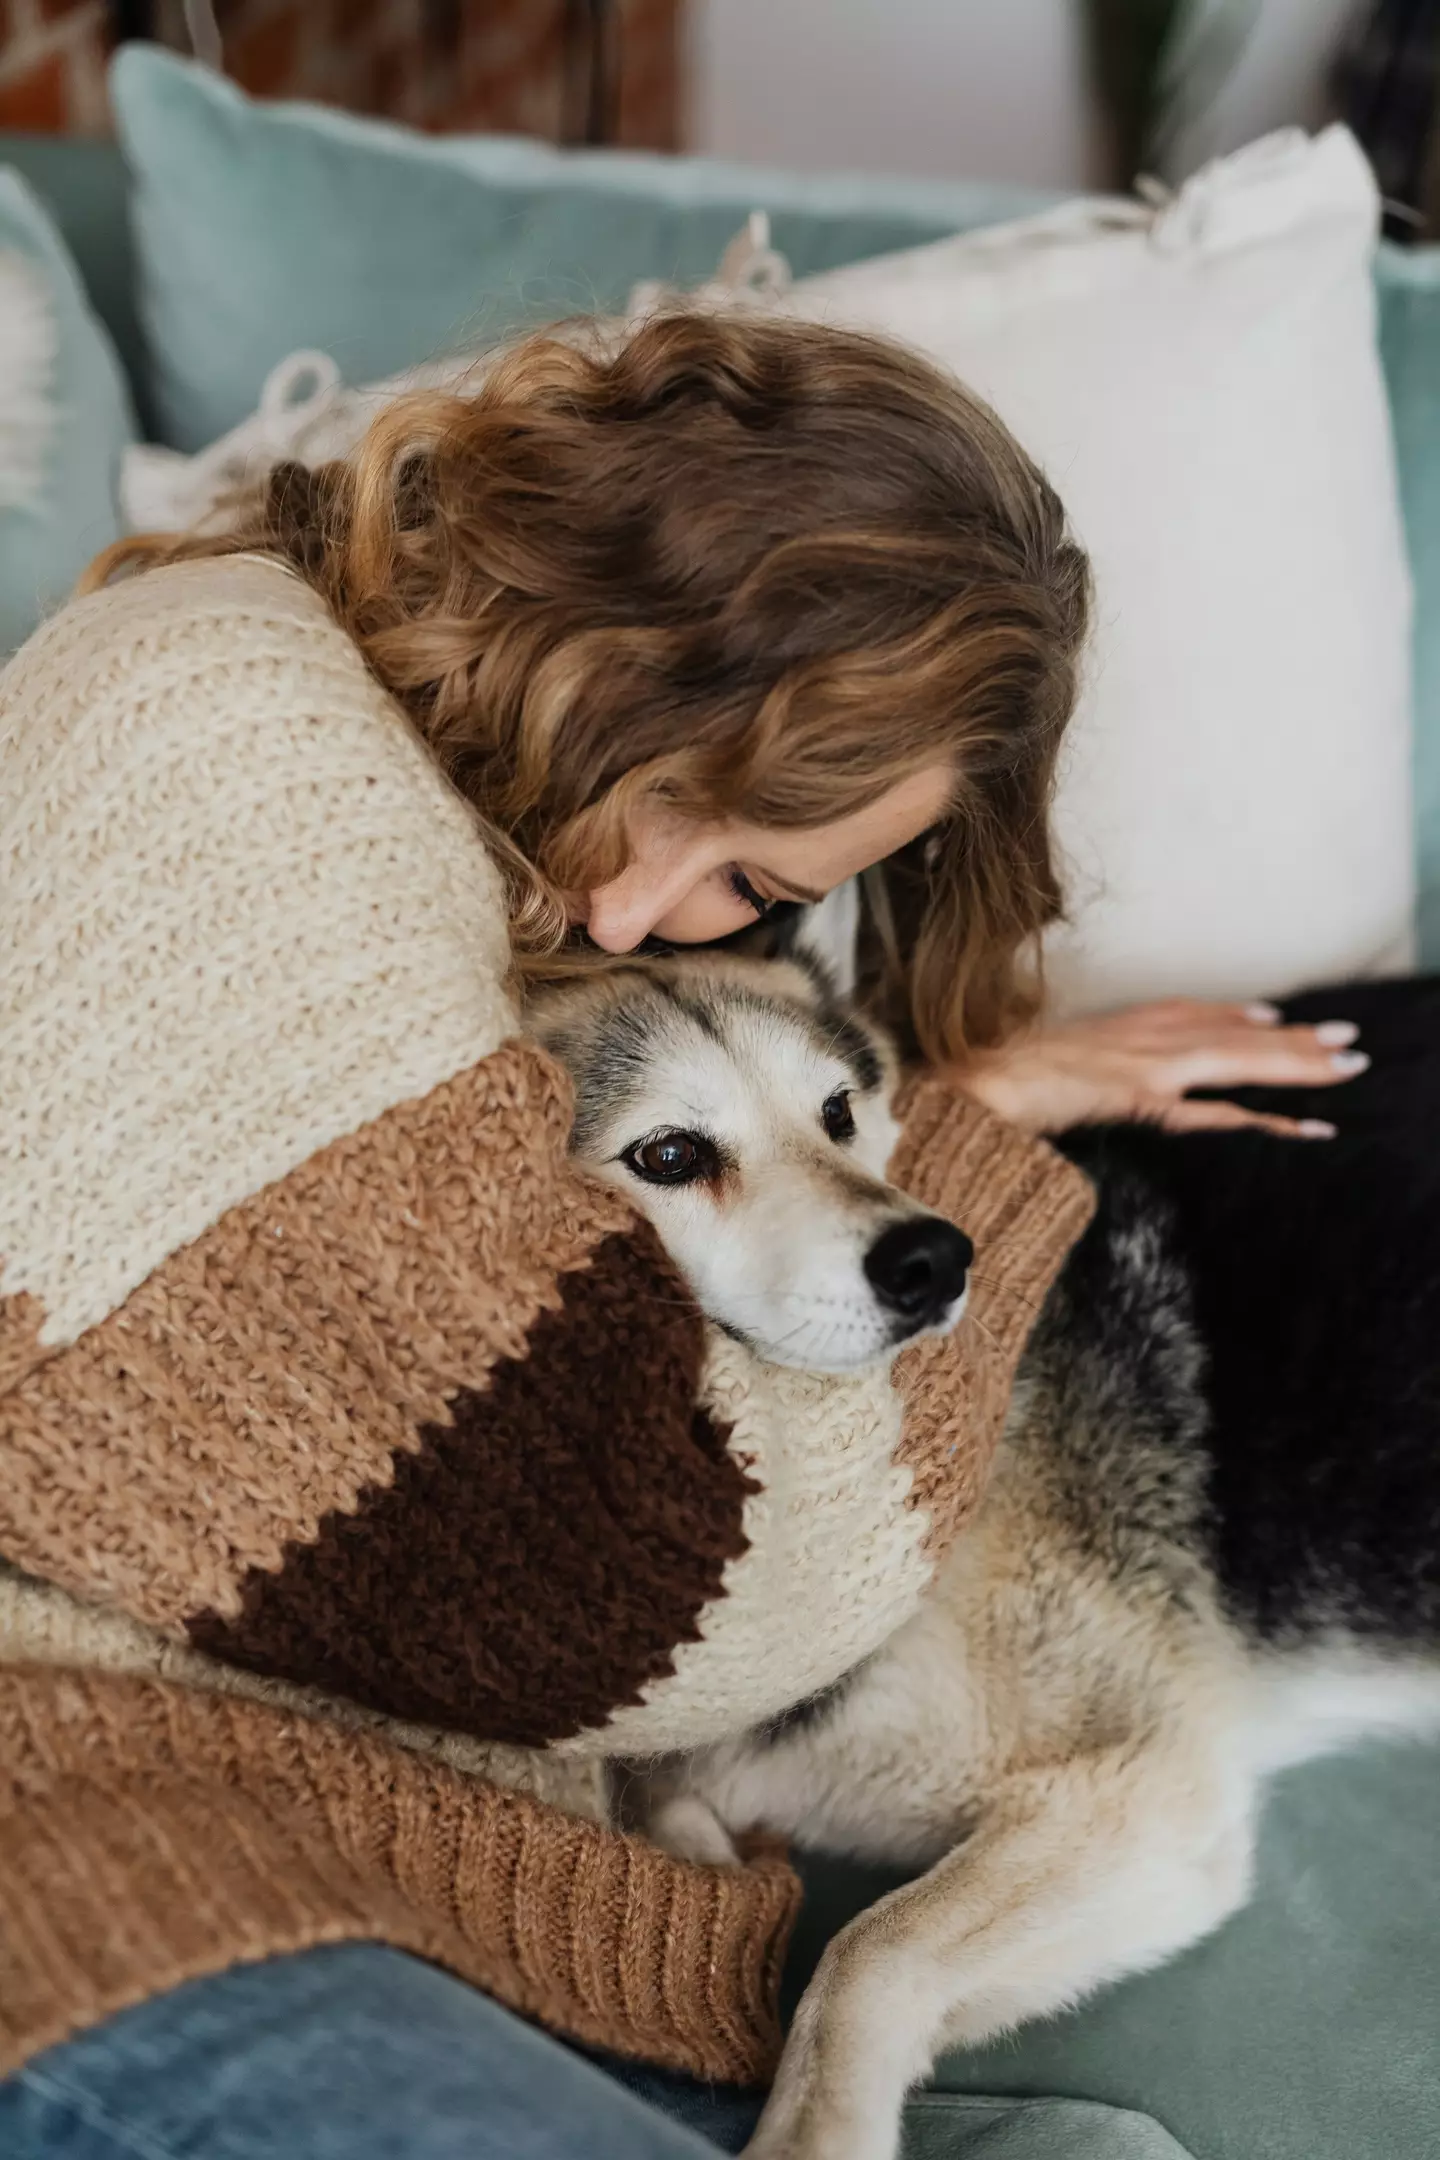 Hugging your dog might make them feel stressed out.